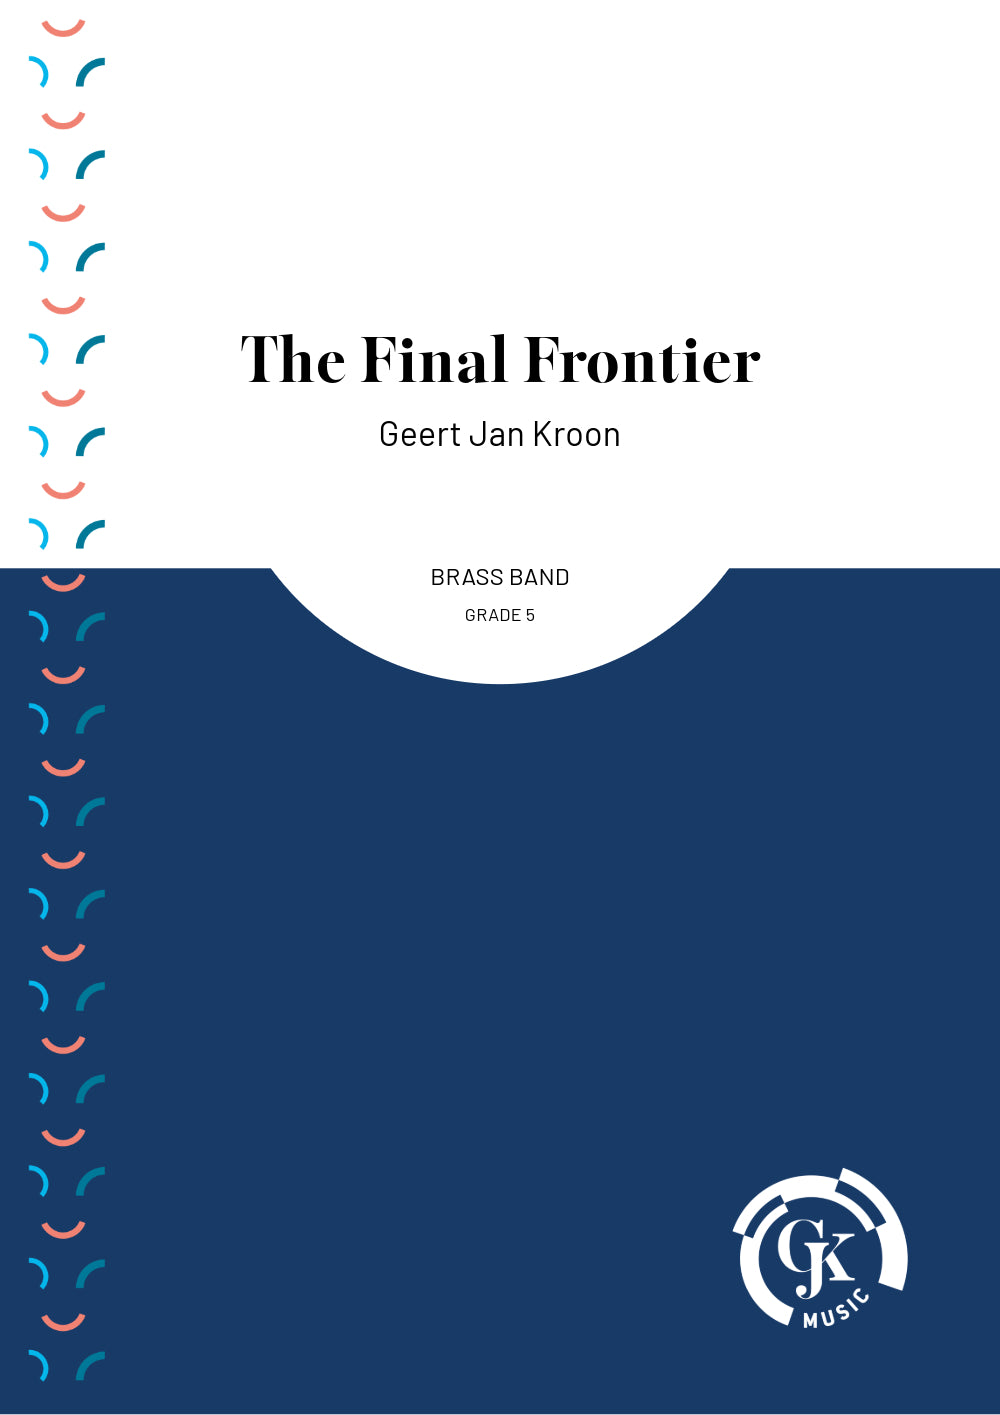 The Final Frontier - Brass Band